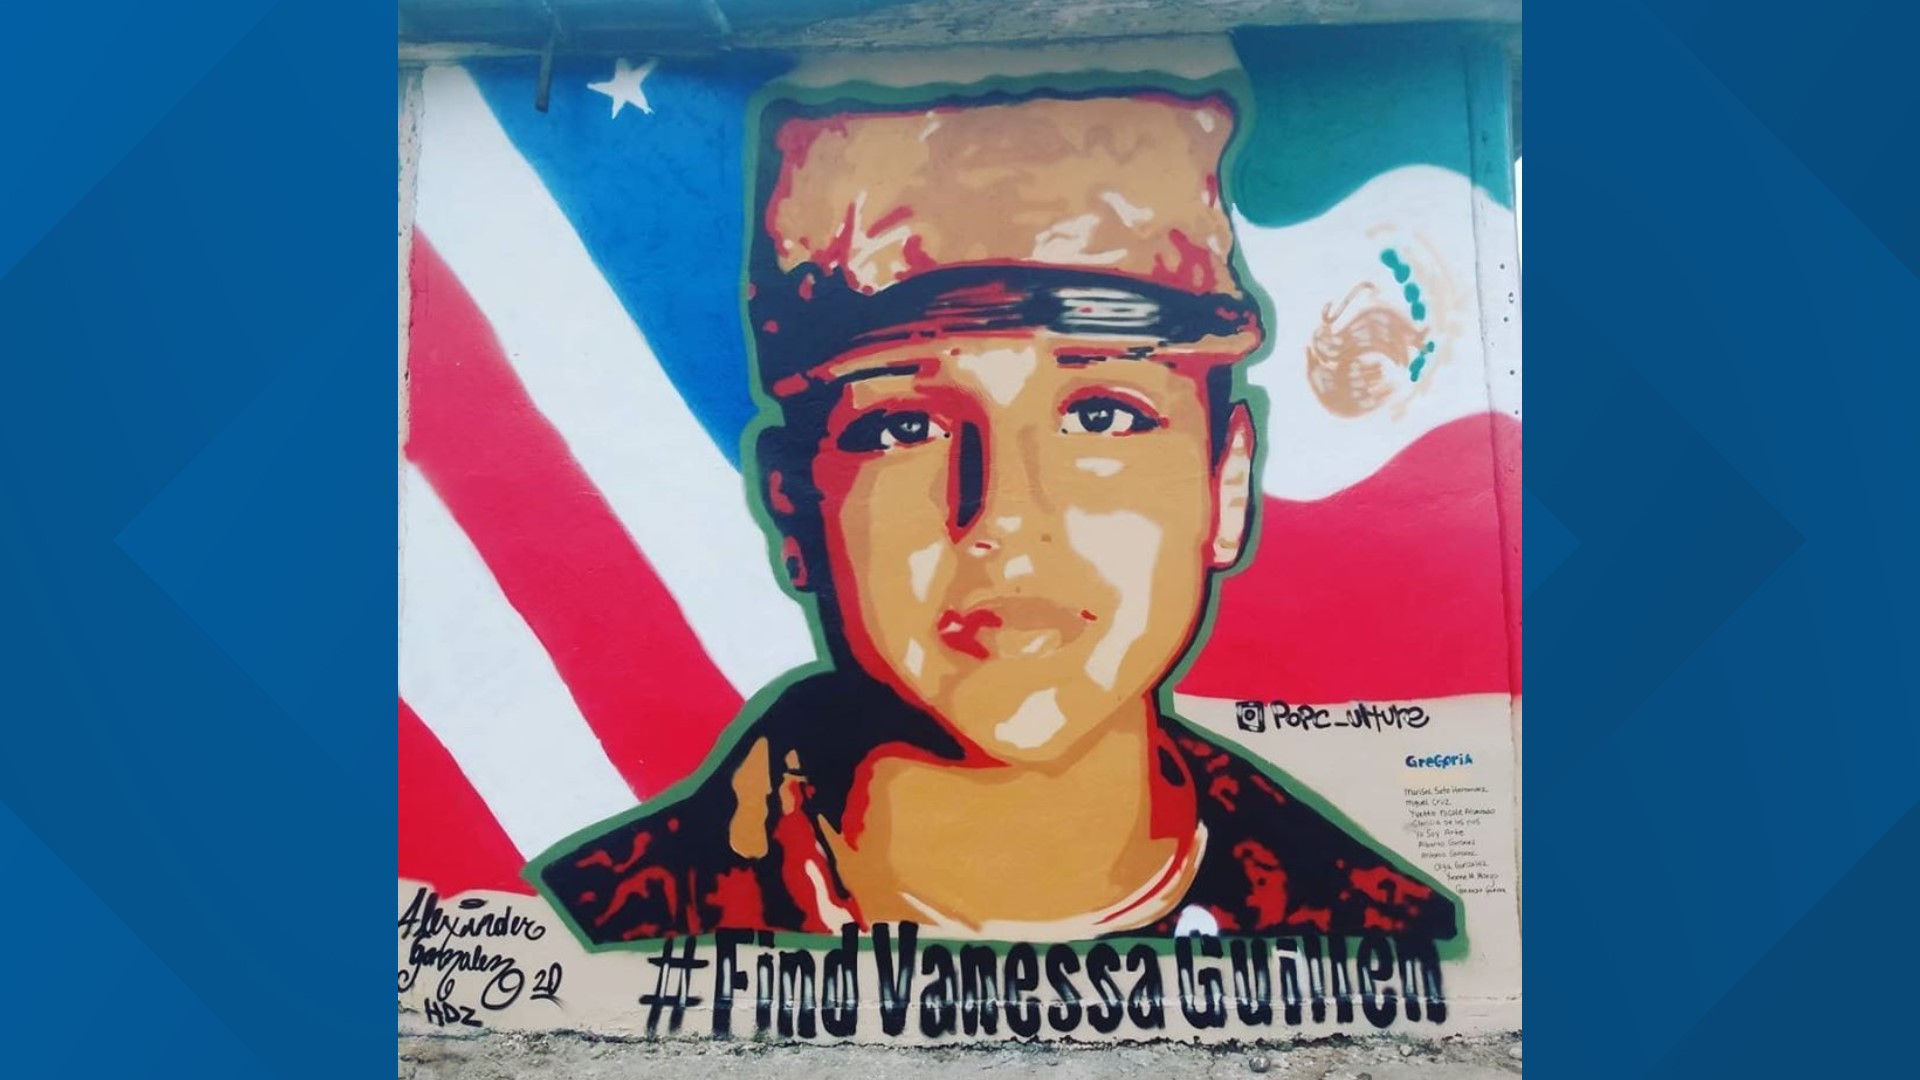 Six hours away from Killeen, a mural of missing Fort Hood solider Vanessa Guillen adorns a wall in hopes of bringing attention to her case.